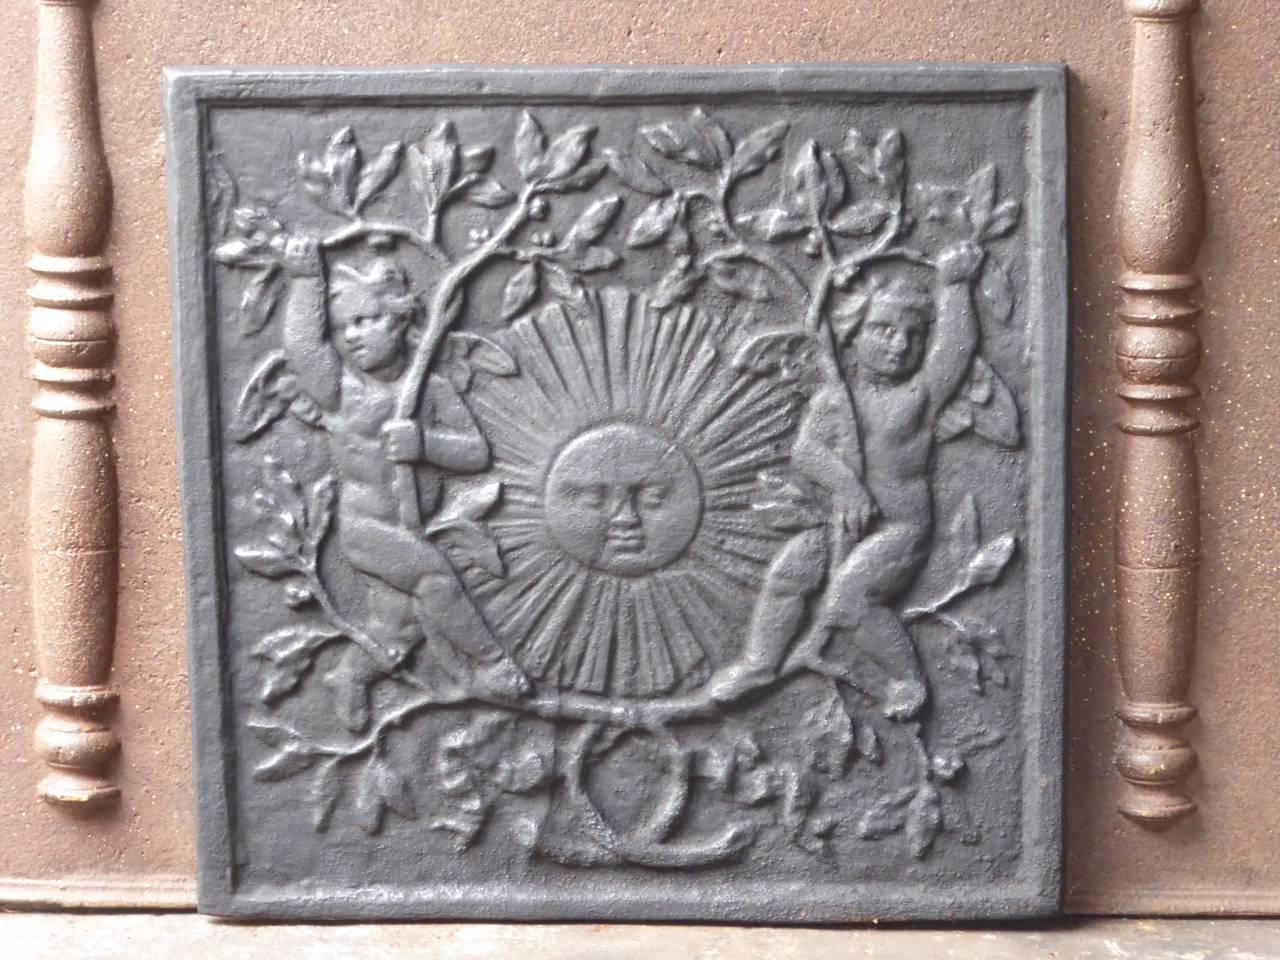 French Louis XIV style fireback with the sun surrounded by two cupids and olive branches. The sun symbolizes King Louis XIV, the Sun King, and the olive branches stand for peace.